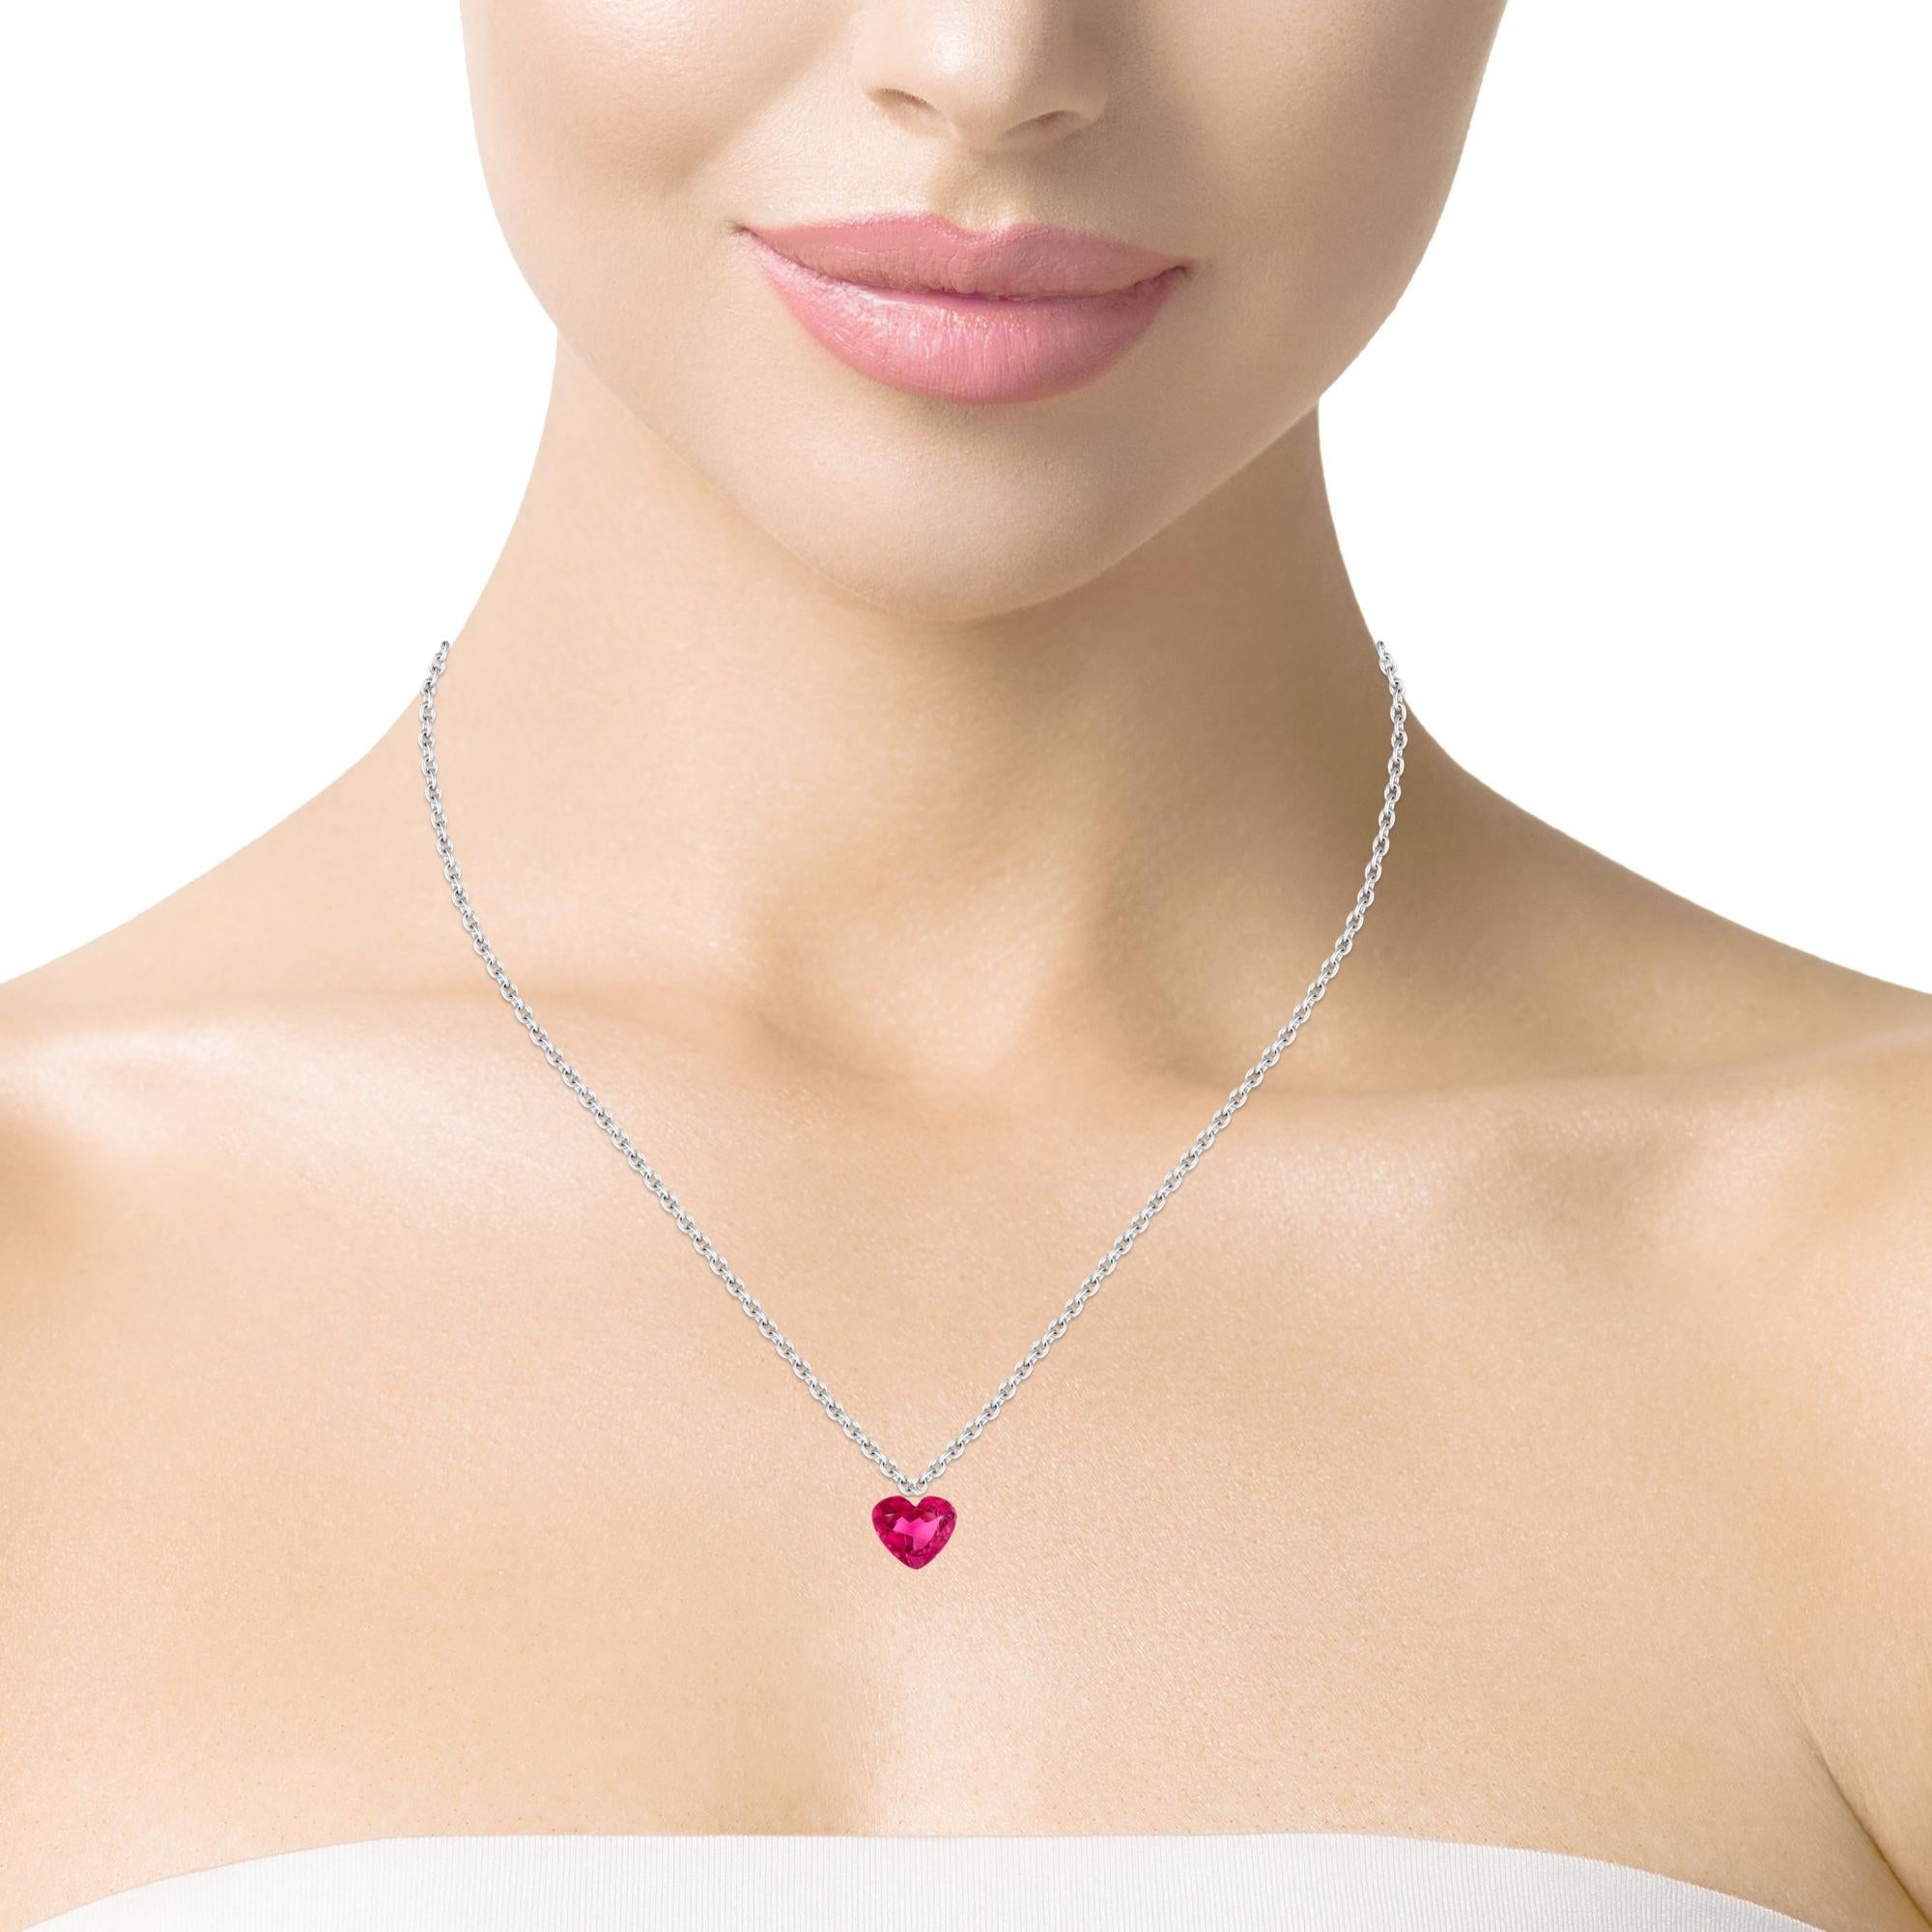 1.99 Carat Heart Shaped Pink Rubellite Tourmaline Necklace in 18k Yellow Gold For Sale 2